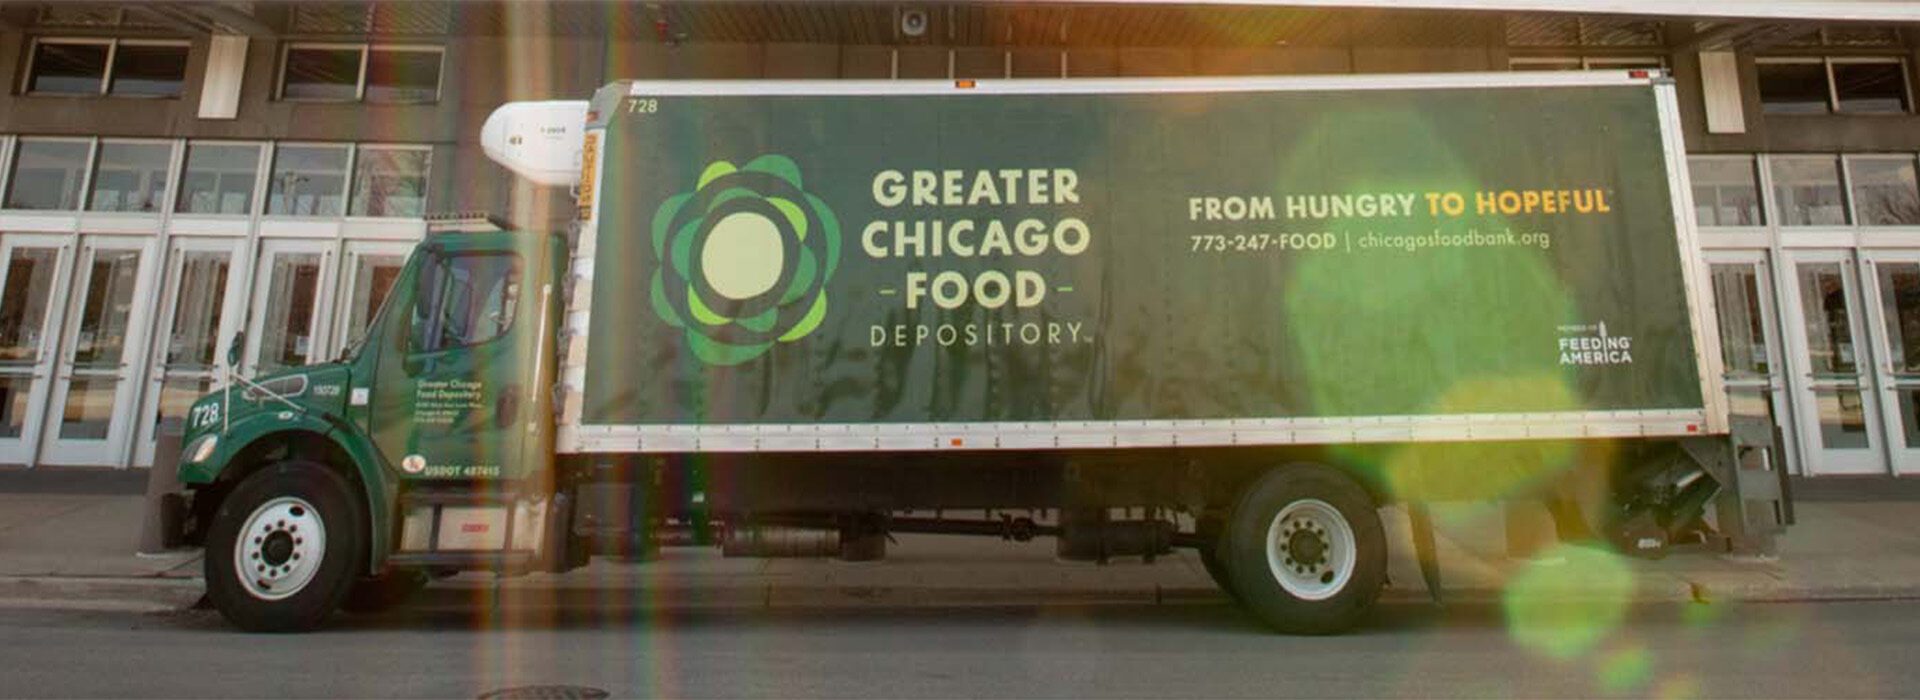 Greater Chicago Food Depository 